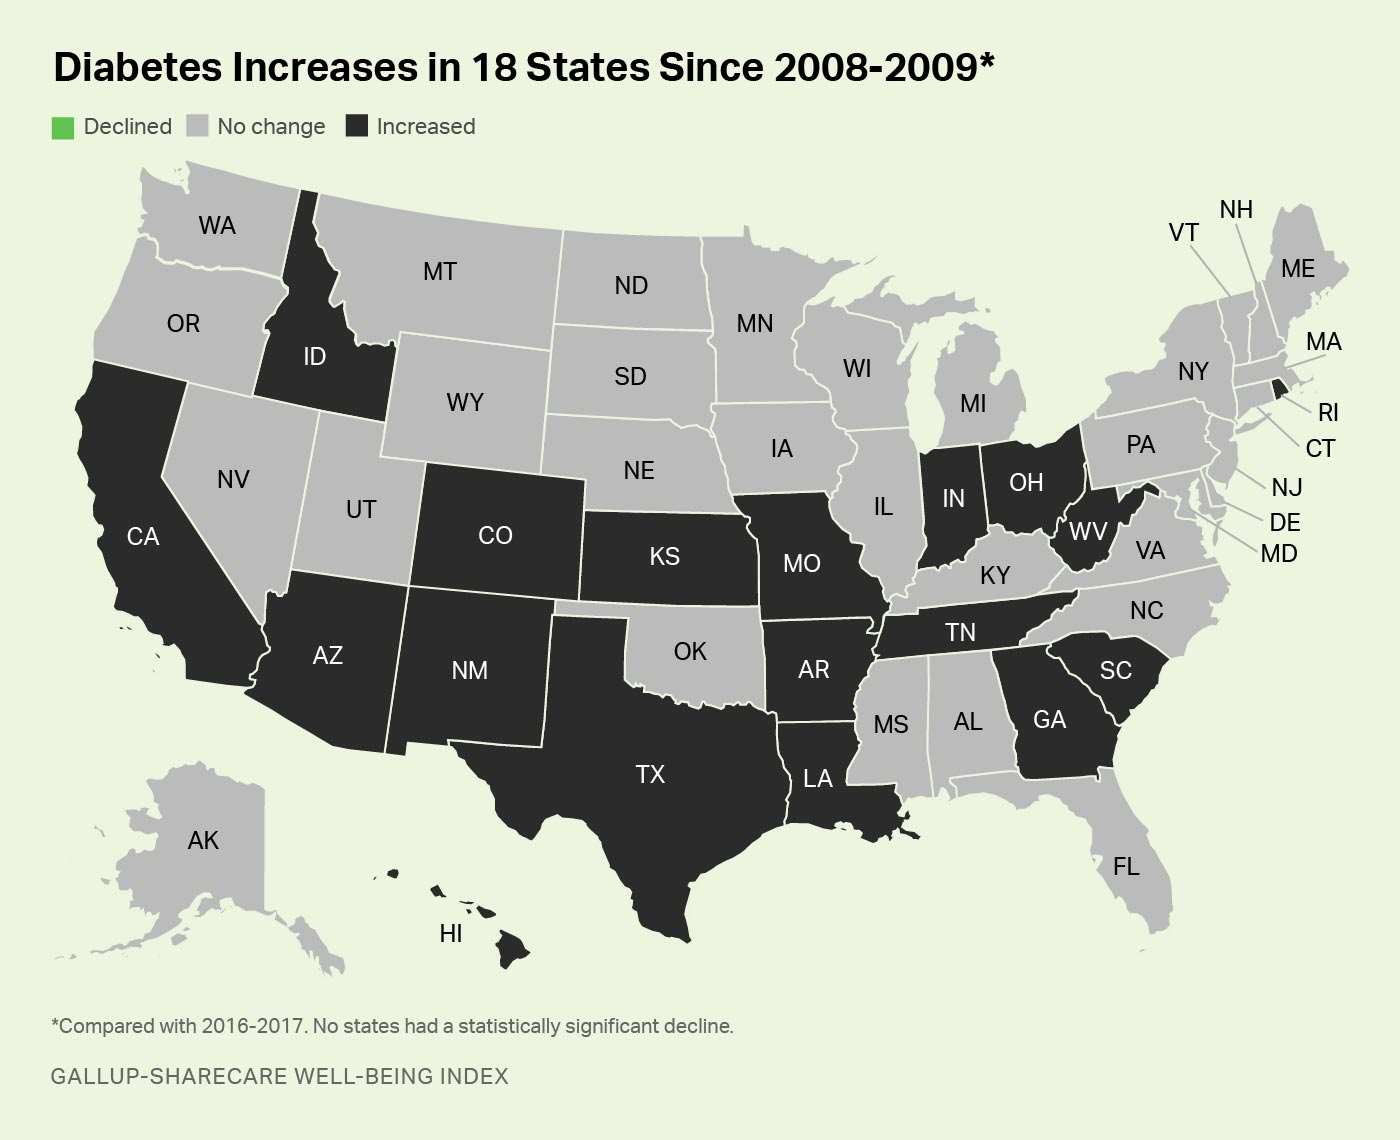 Map. Diabetes rates have increased in 18 states since 2008-2009 and have not decreased in any U.S. state